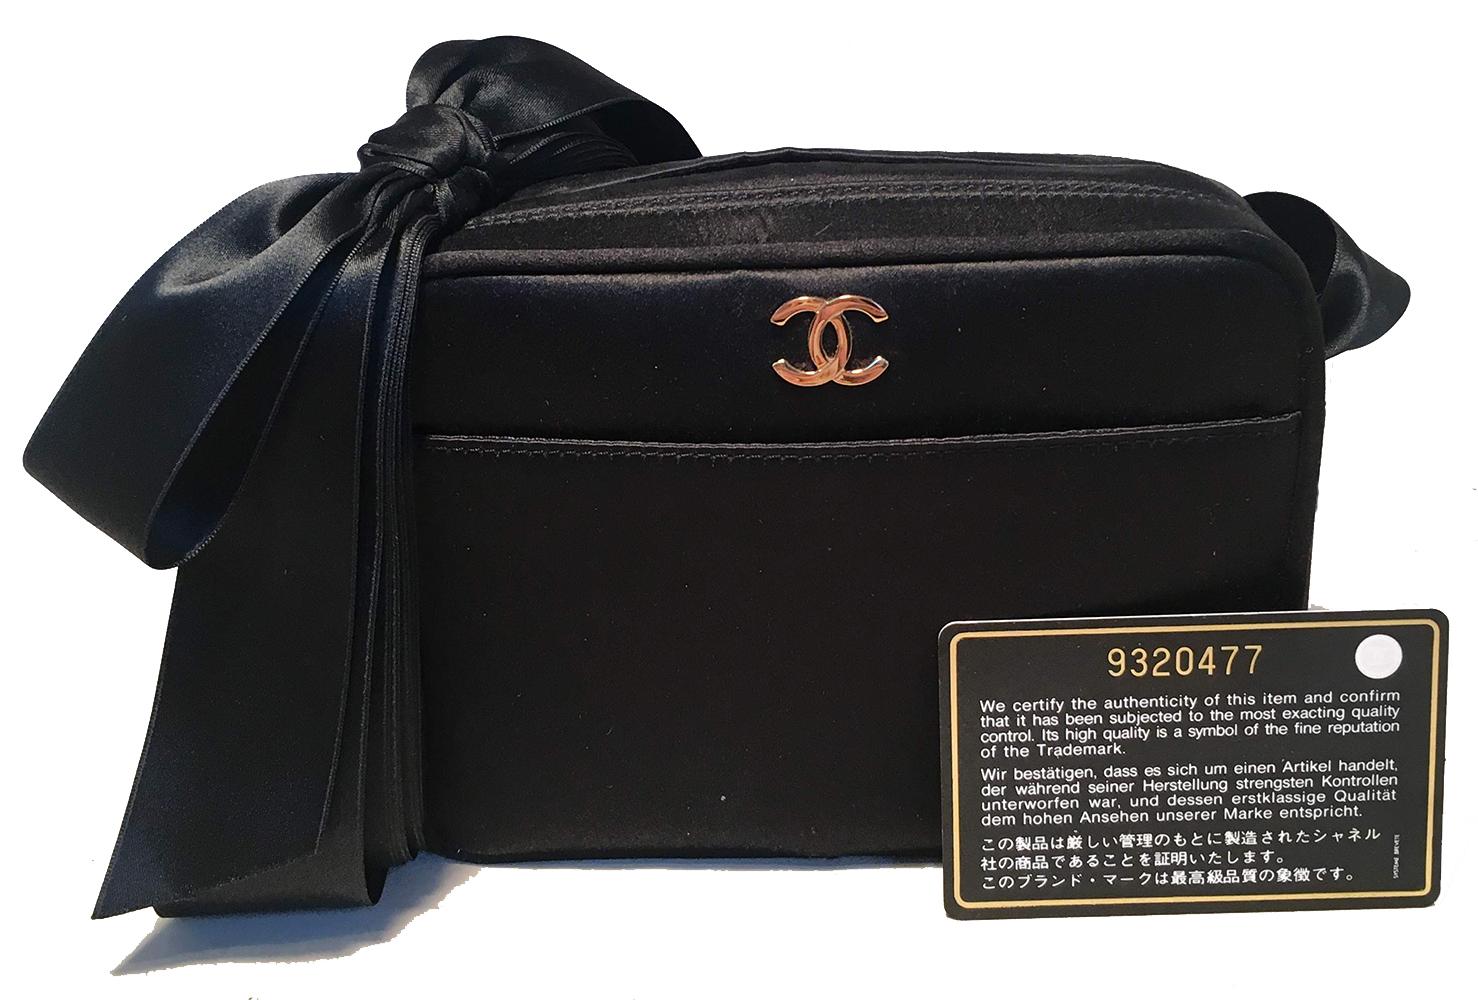 GORGEOUS Chanel black satin ribbon evening bag in excellent condition. Black satin exterior with a front slit pocket and small gold CC logo. Multiple black satin ribbon shoulder strap can be worn a variety of ways to suit your personal style. Tie a